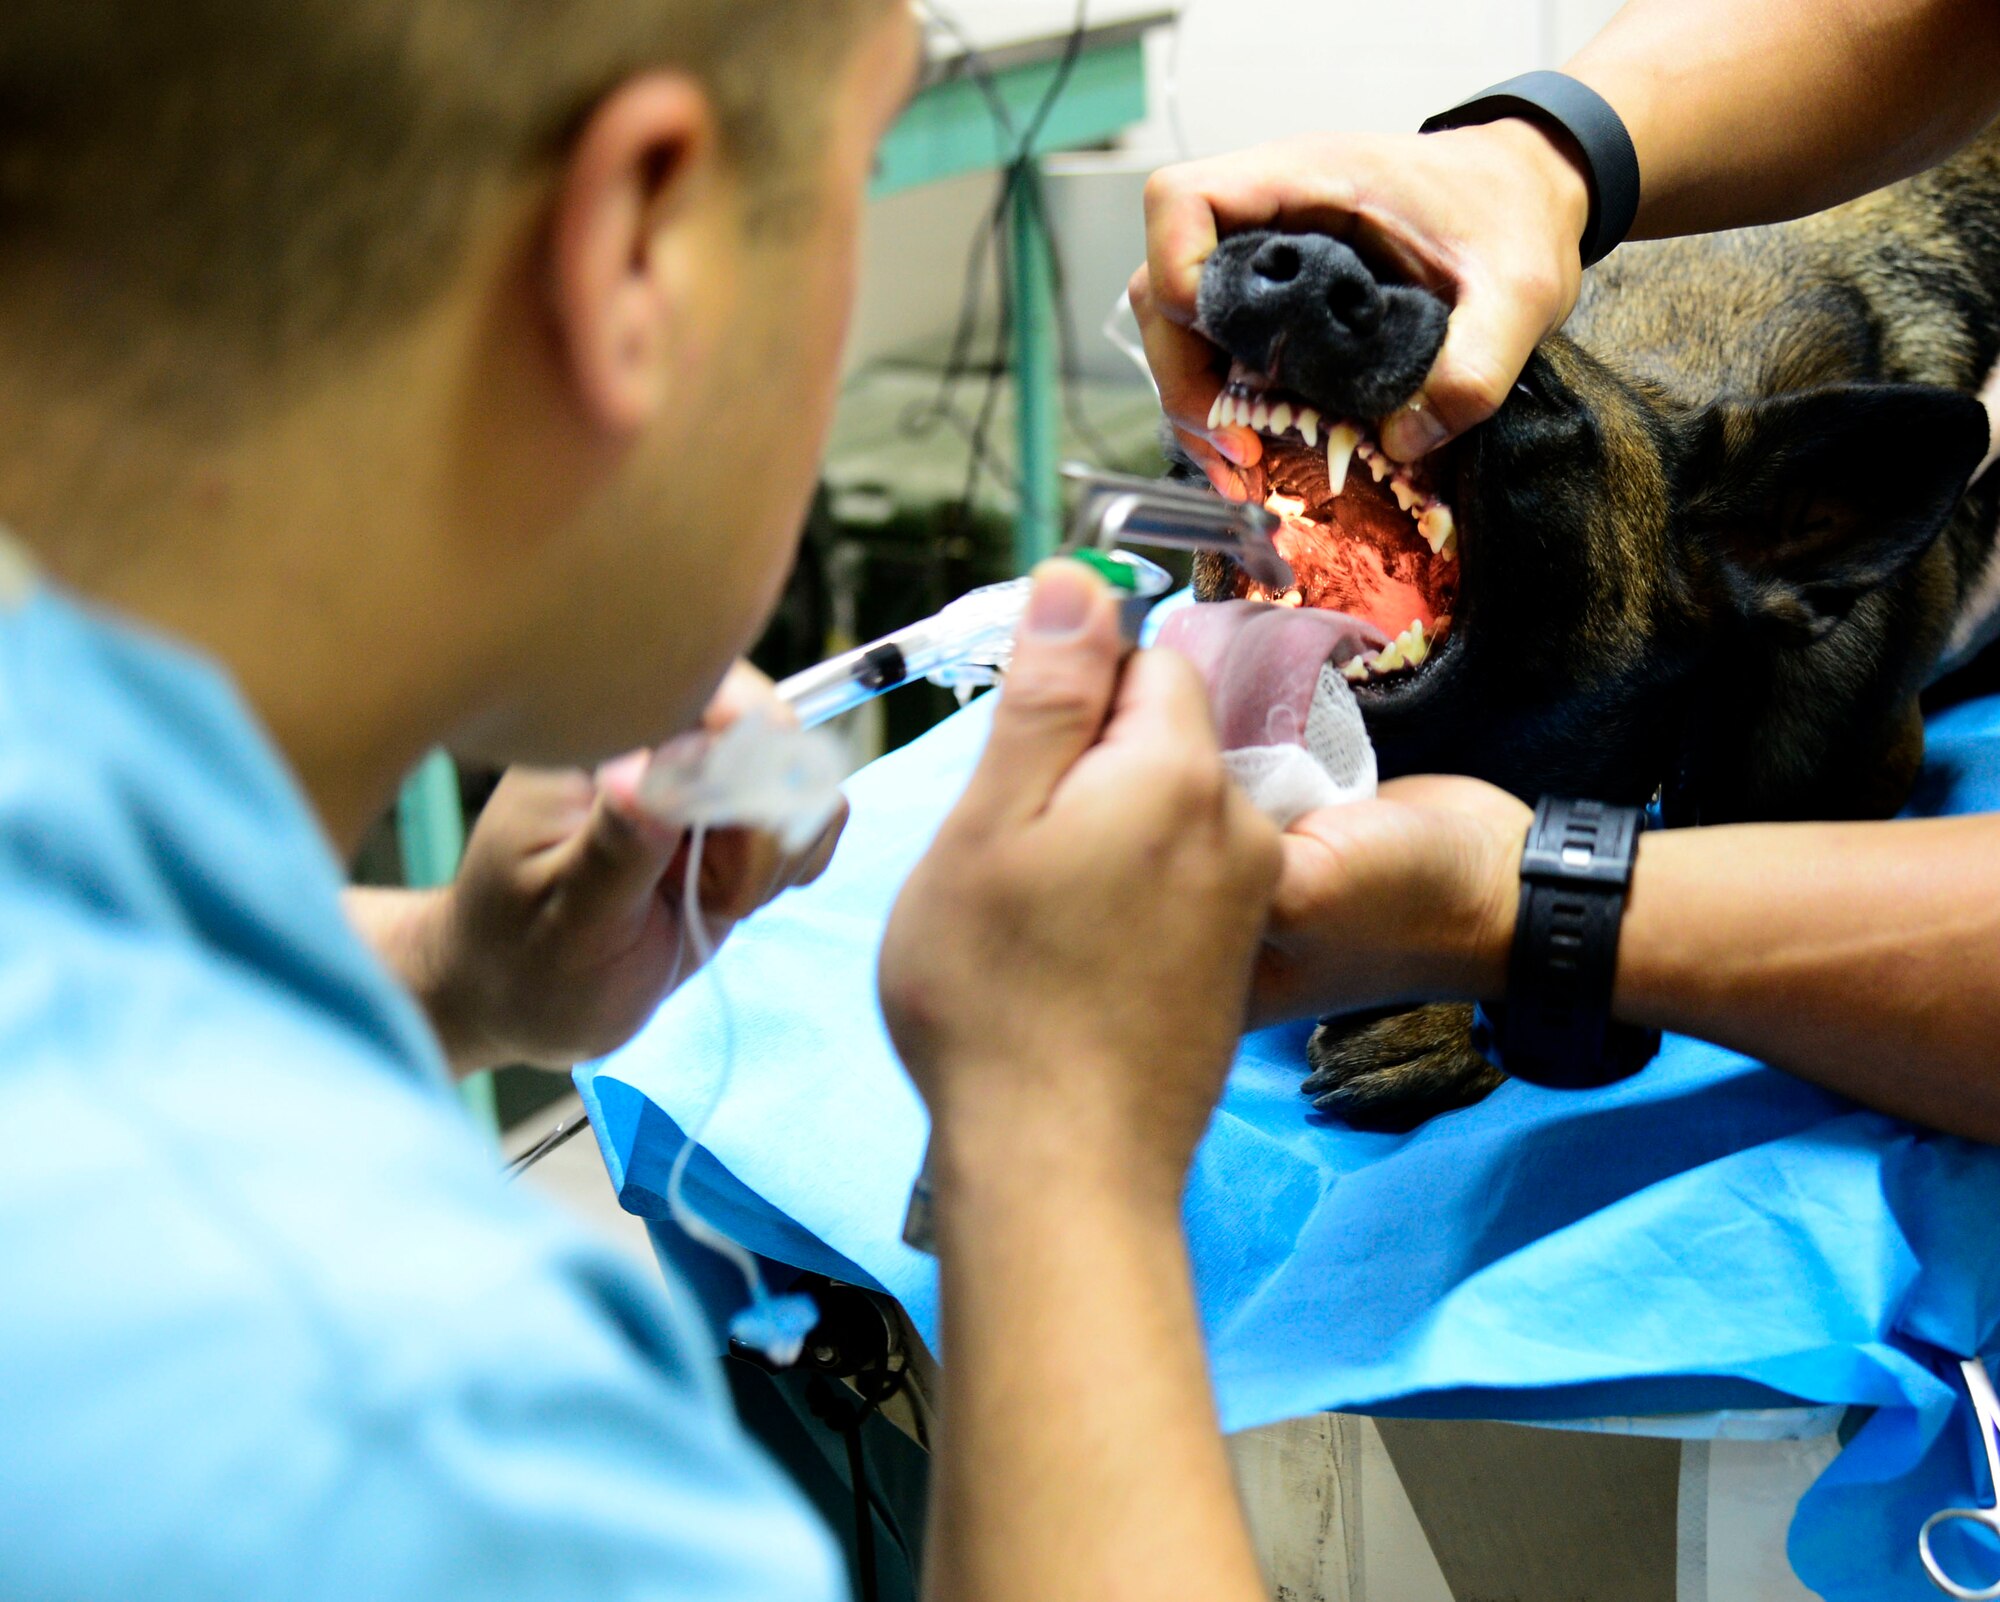 .S. Army Specialist Nathan Creel, 463rd Military Detachment Veterinary Service animal technician, intubates FFrida, 386th Expeditionary Security Forces Squadron Military Working Dog, during a dental cleaning at an undisclosed location in Southwest Asia Aug. 27, 2015. Even in a deployed environment, it is important for MWDs to receive routine dental care to prevent health issues. (U.S. Air Force photo by Senior Airman Racheal E. Watson/Released)